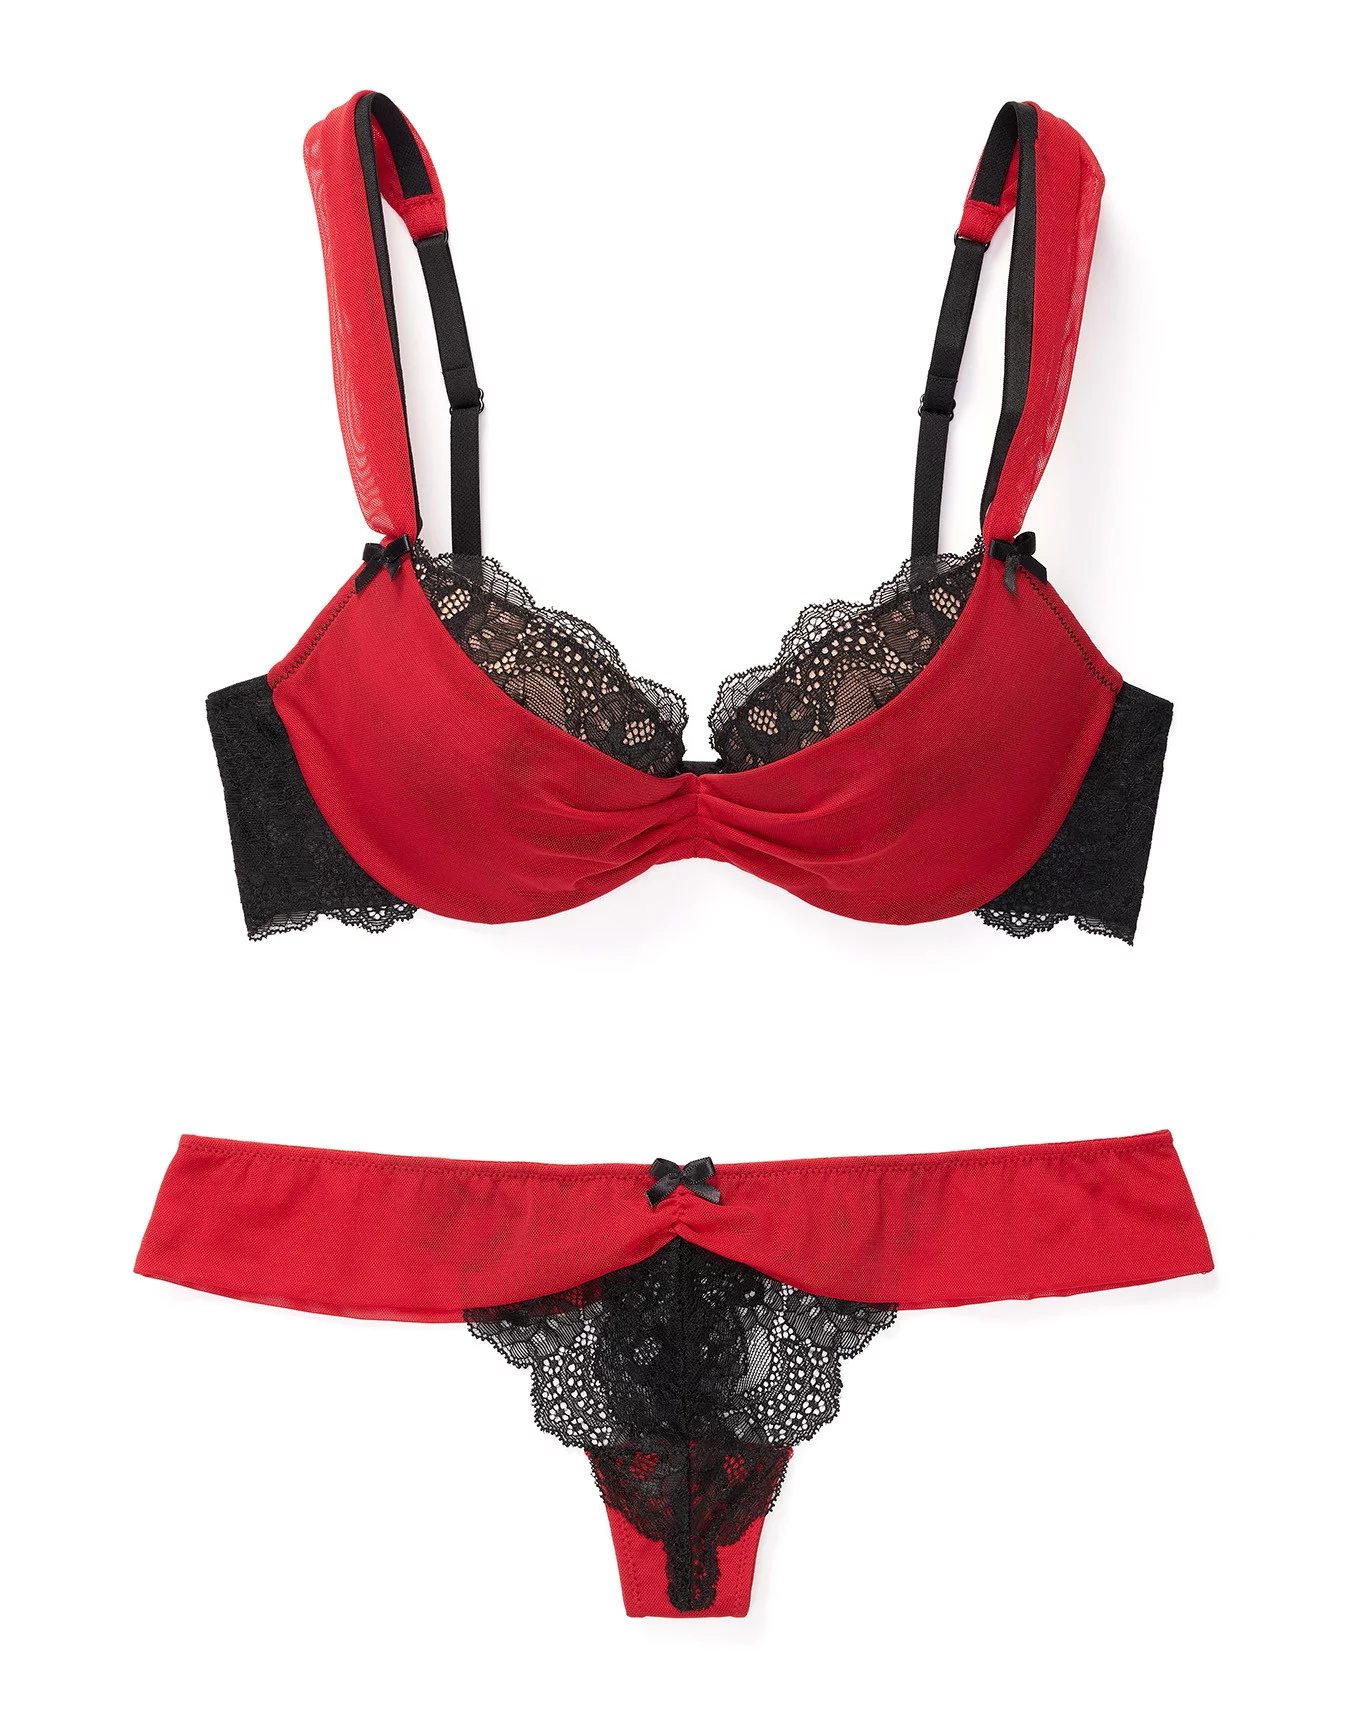 Candie's, Intimates & Sleepwear, Cute Red With Black Accents Padded Bra  By Candies In Size 34a